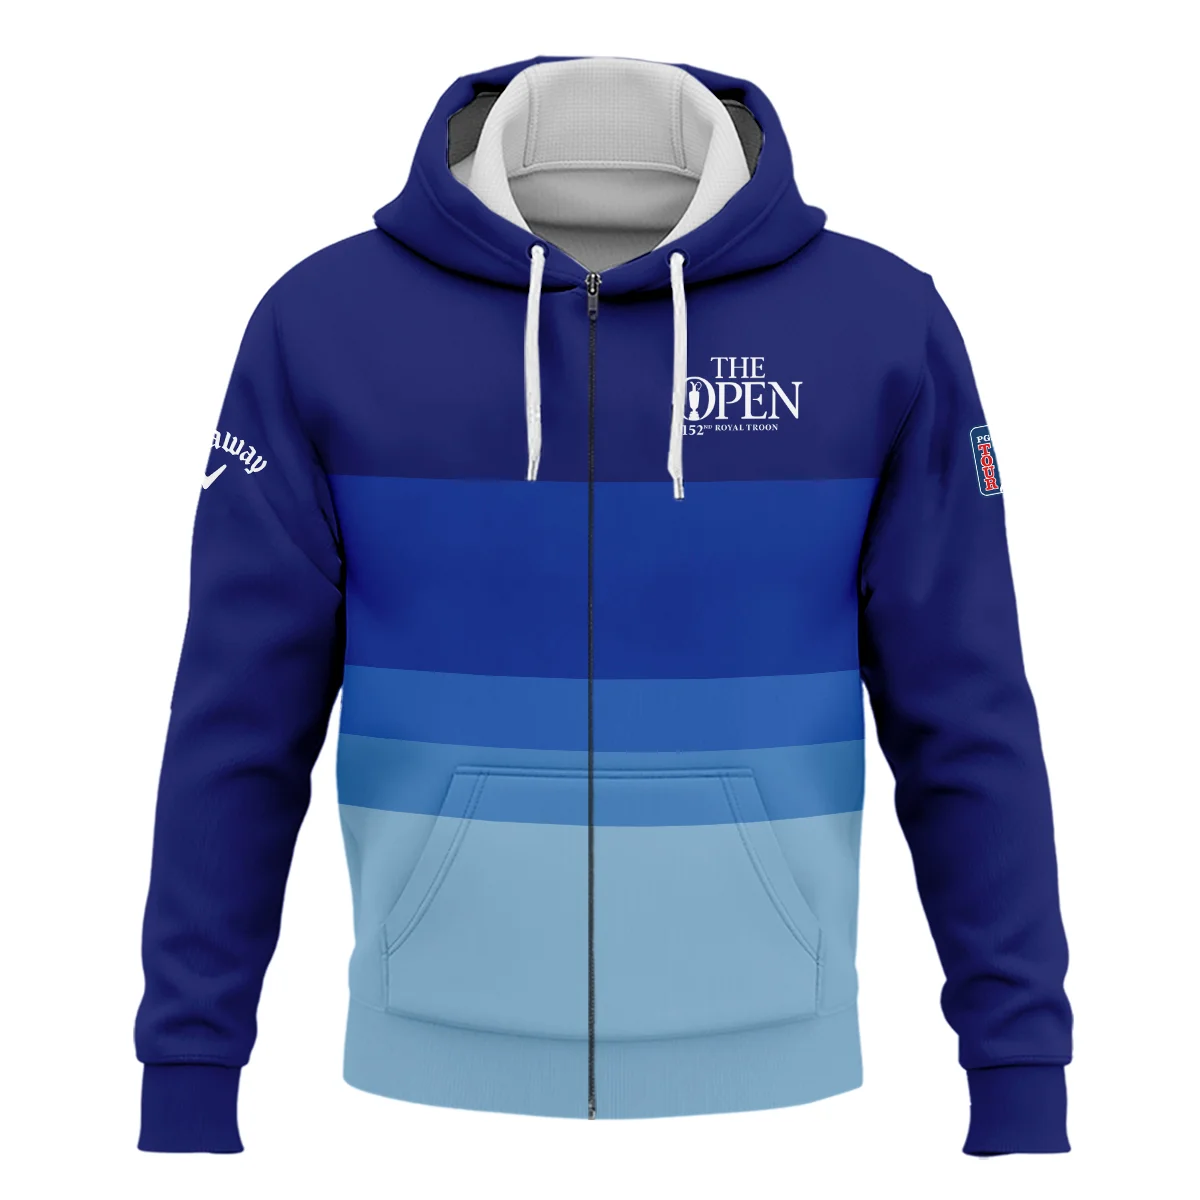 Blue Gradient Line Pattern Background Callaway 152nd Open Championship Performance Quarter Zip Sweatshirt With Pockets All Over Prints HOTOP270624A04CLWTS